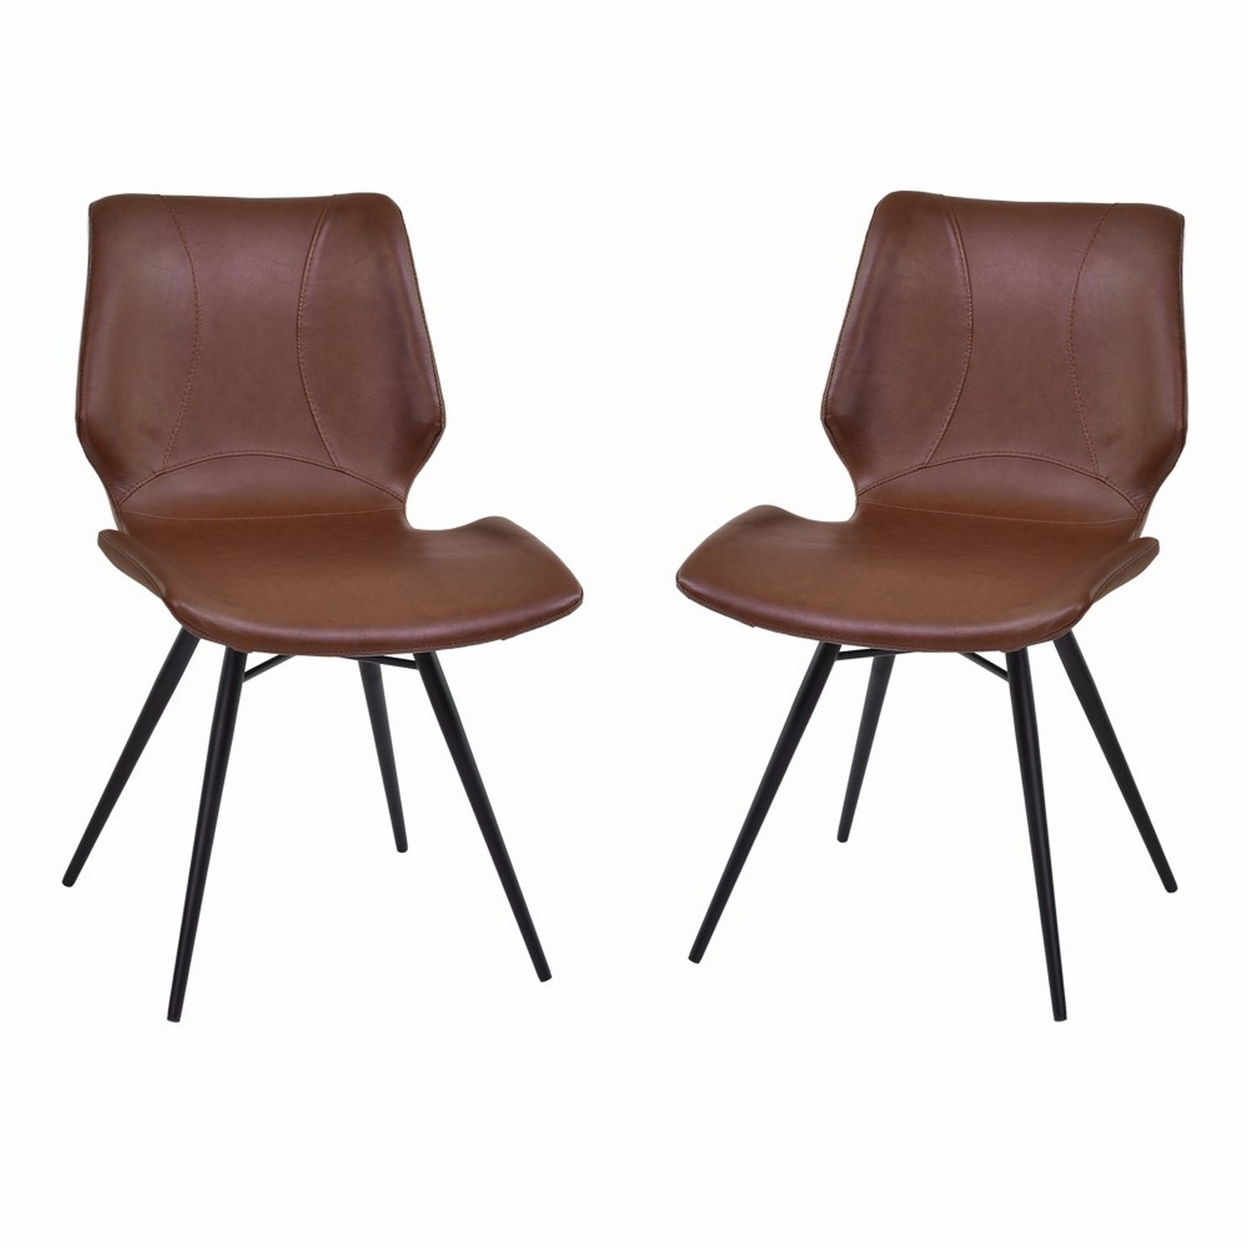 Leatherette Dining Chair With Tubular Metal Legs, Set Of 2, Brown And Black- Saltoro Sherpi